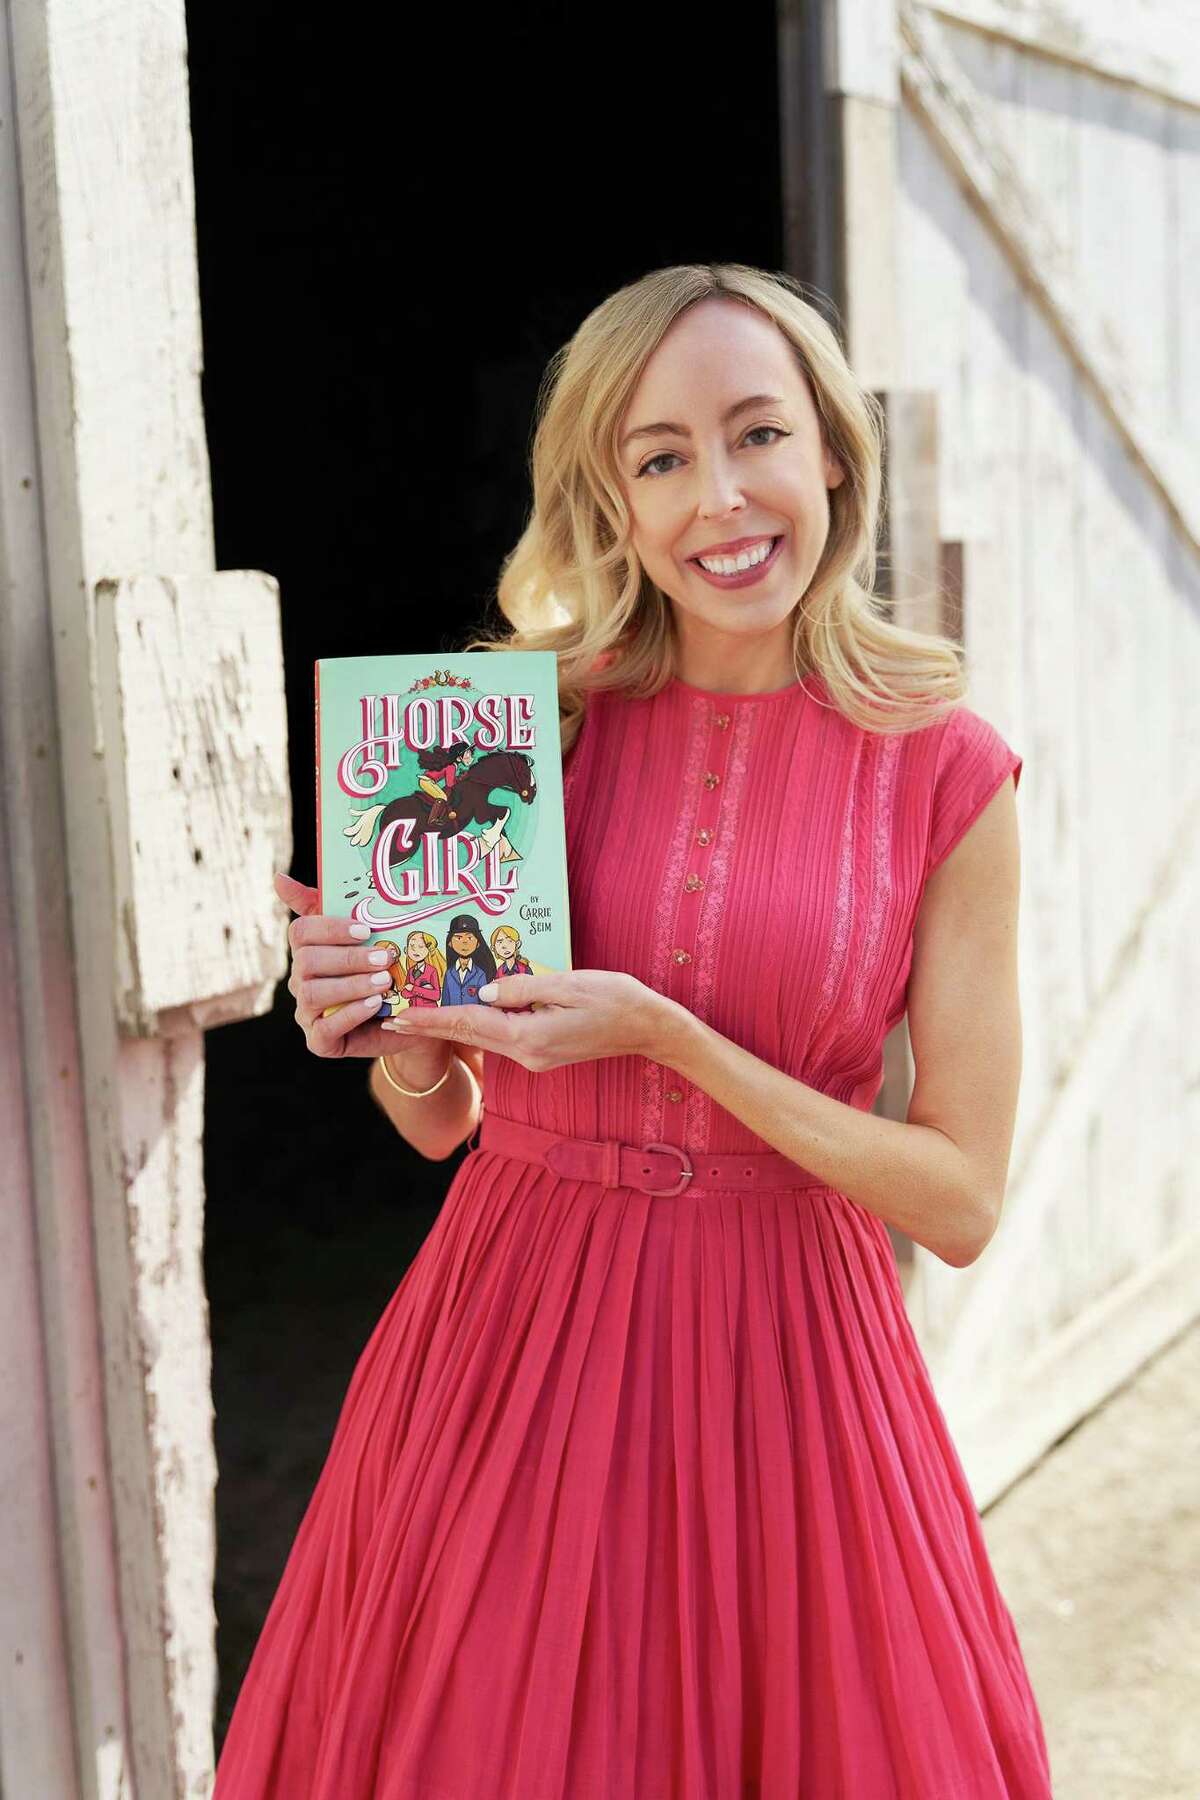 Darien's Carrie Seim will publish her book "Horse Girl" on March 30.